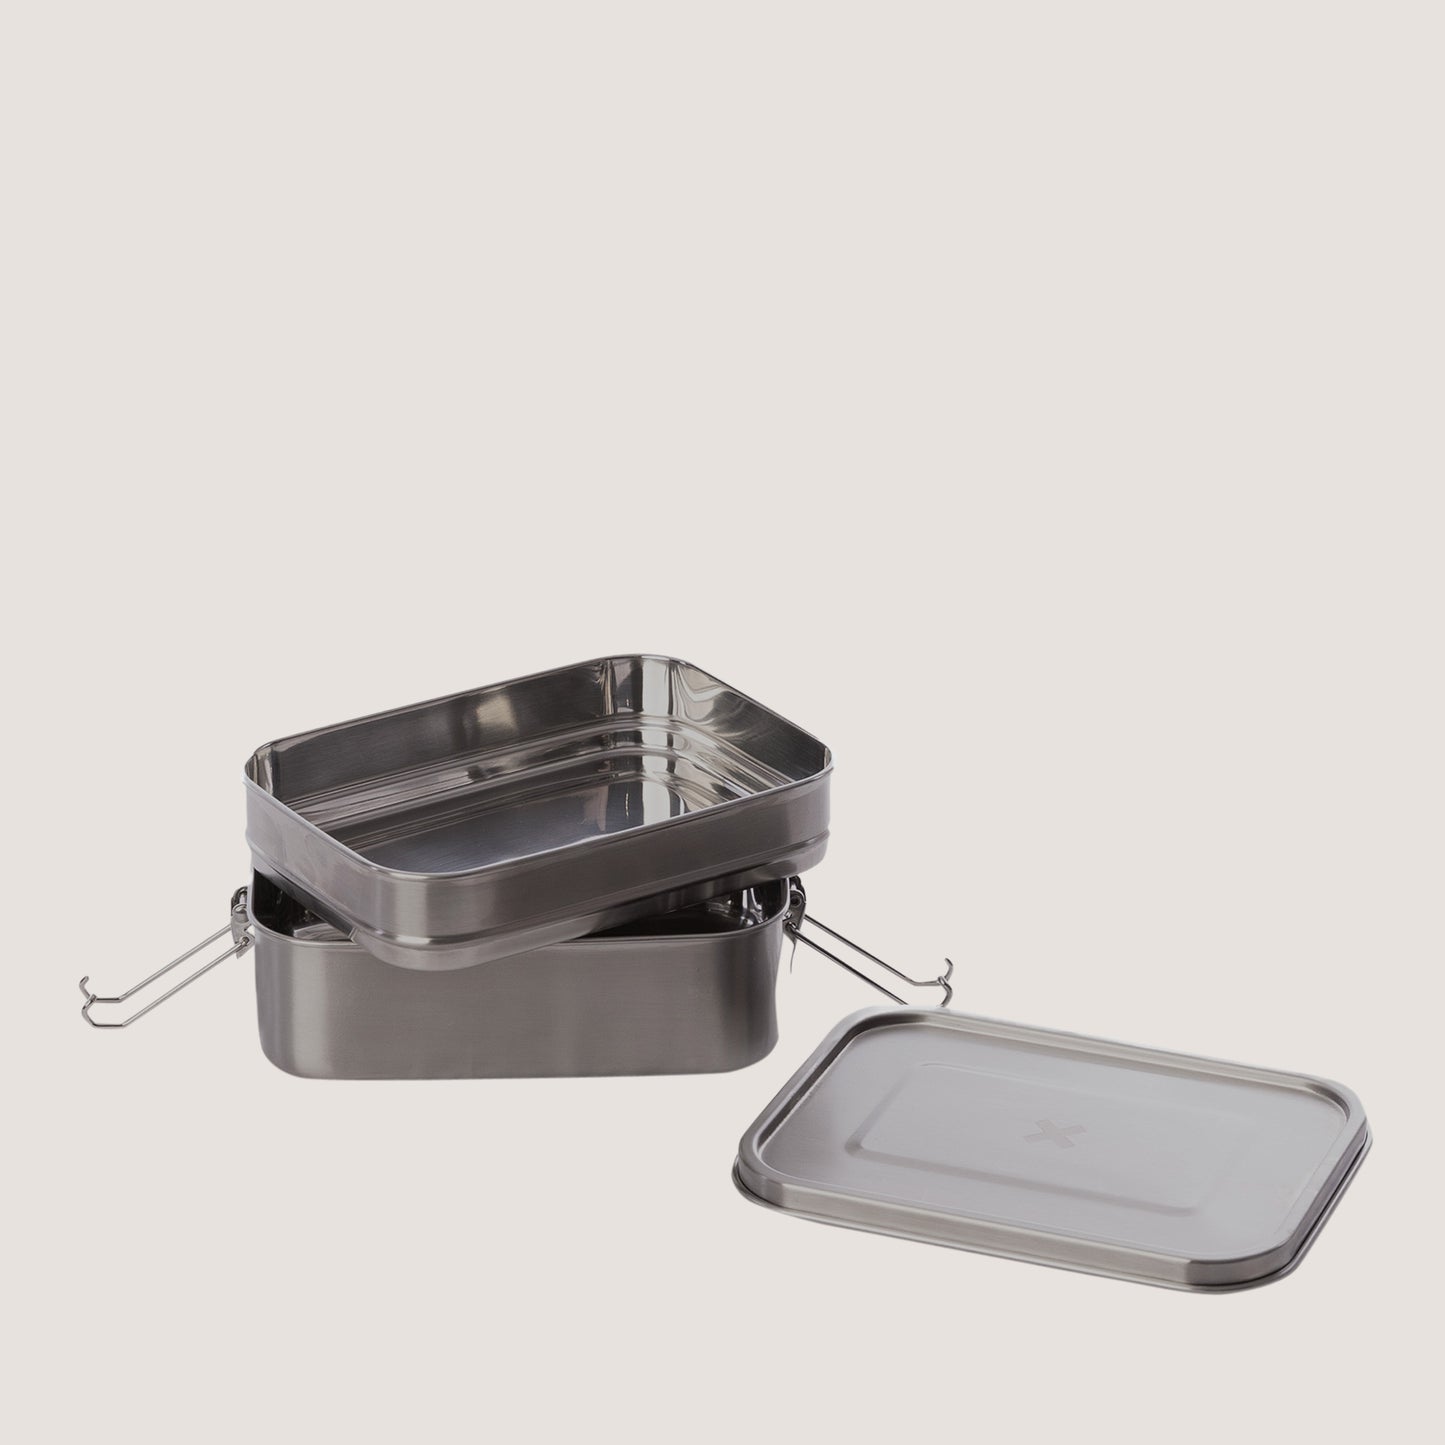 Load image into Gallery viewer, Picnic Bento - Stainless Steel Bento Box
